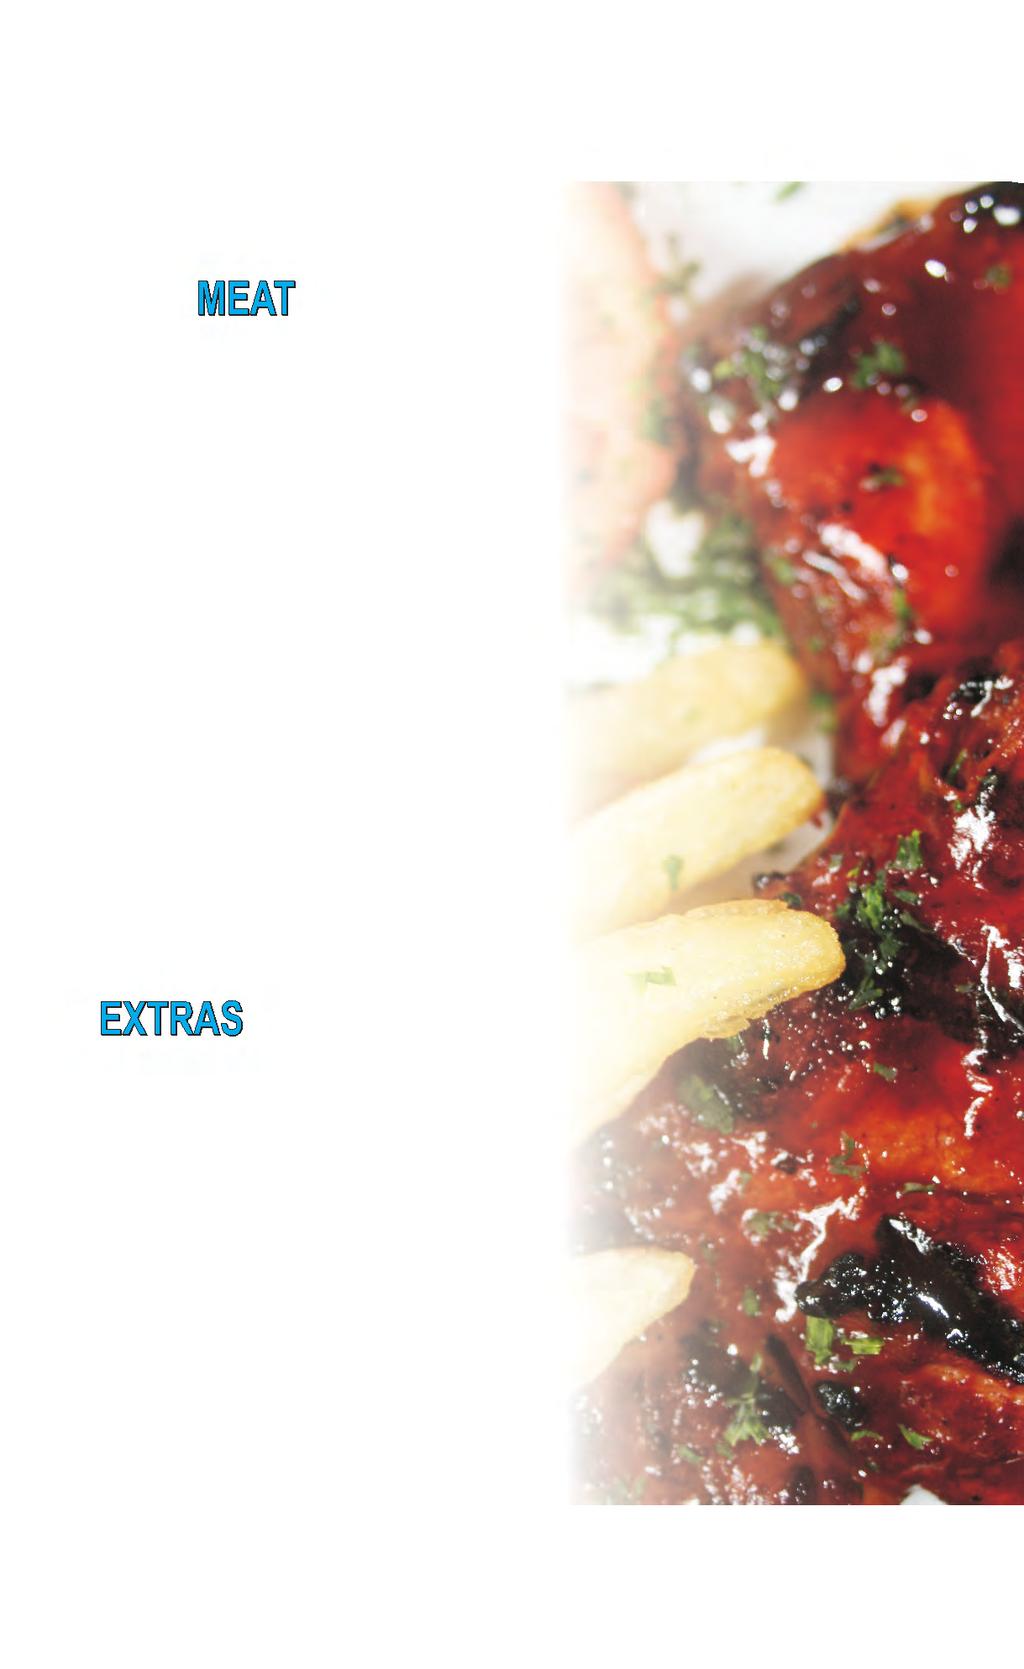 traditionally African ribs, basted in our secret sauce style.